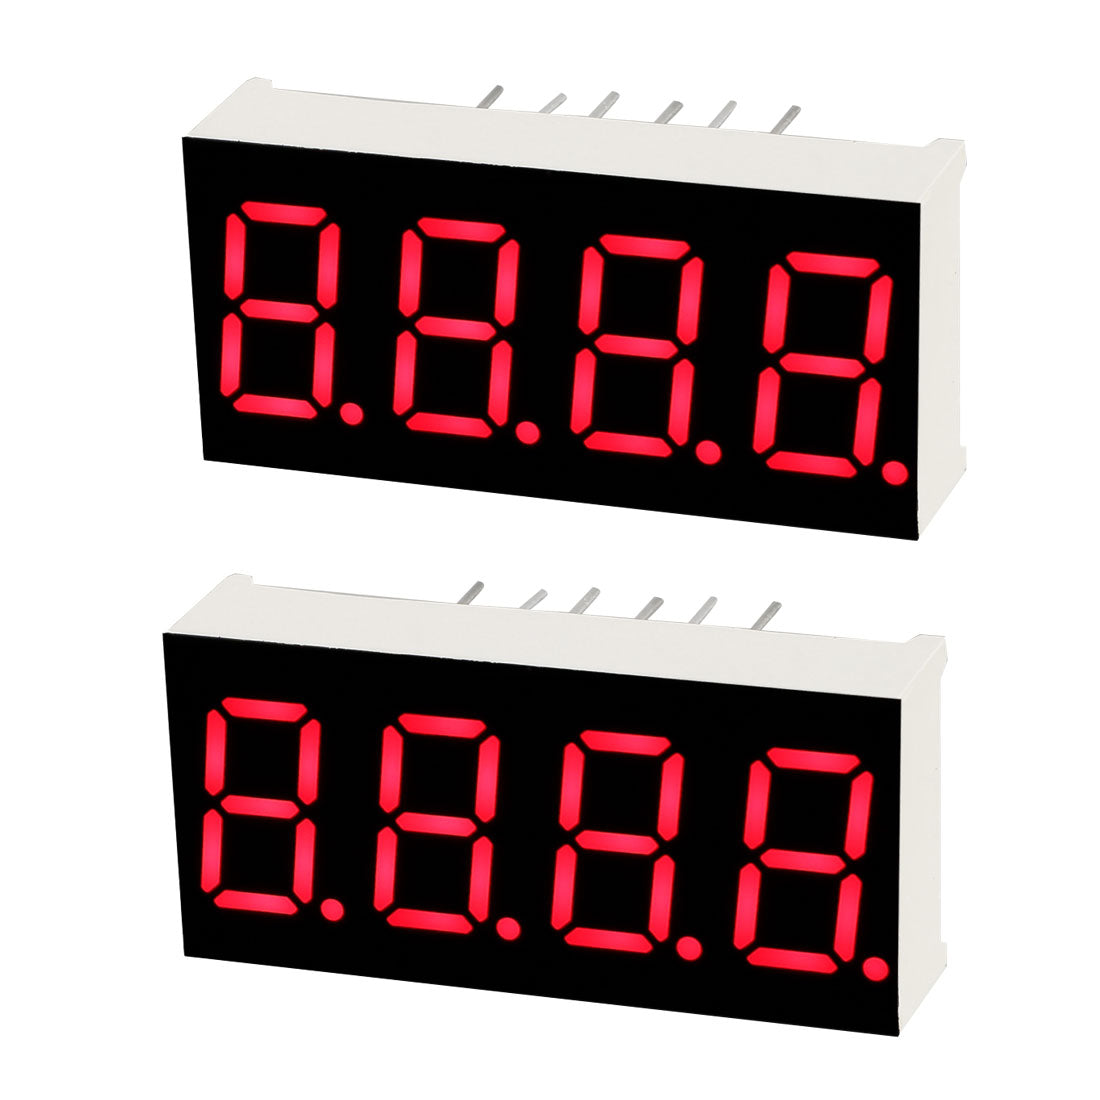 uxcell Uxcell Common Cathode 12 Pin 4 Bit 7 Segment 1.18 x 0.55 x 0.28 Inch 0.35" Red LED Display Digital Tube 2pcs